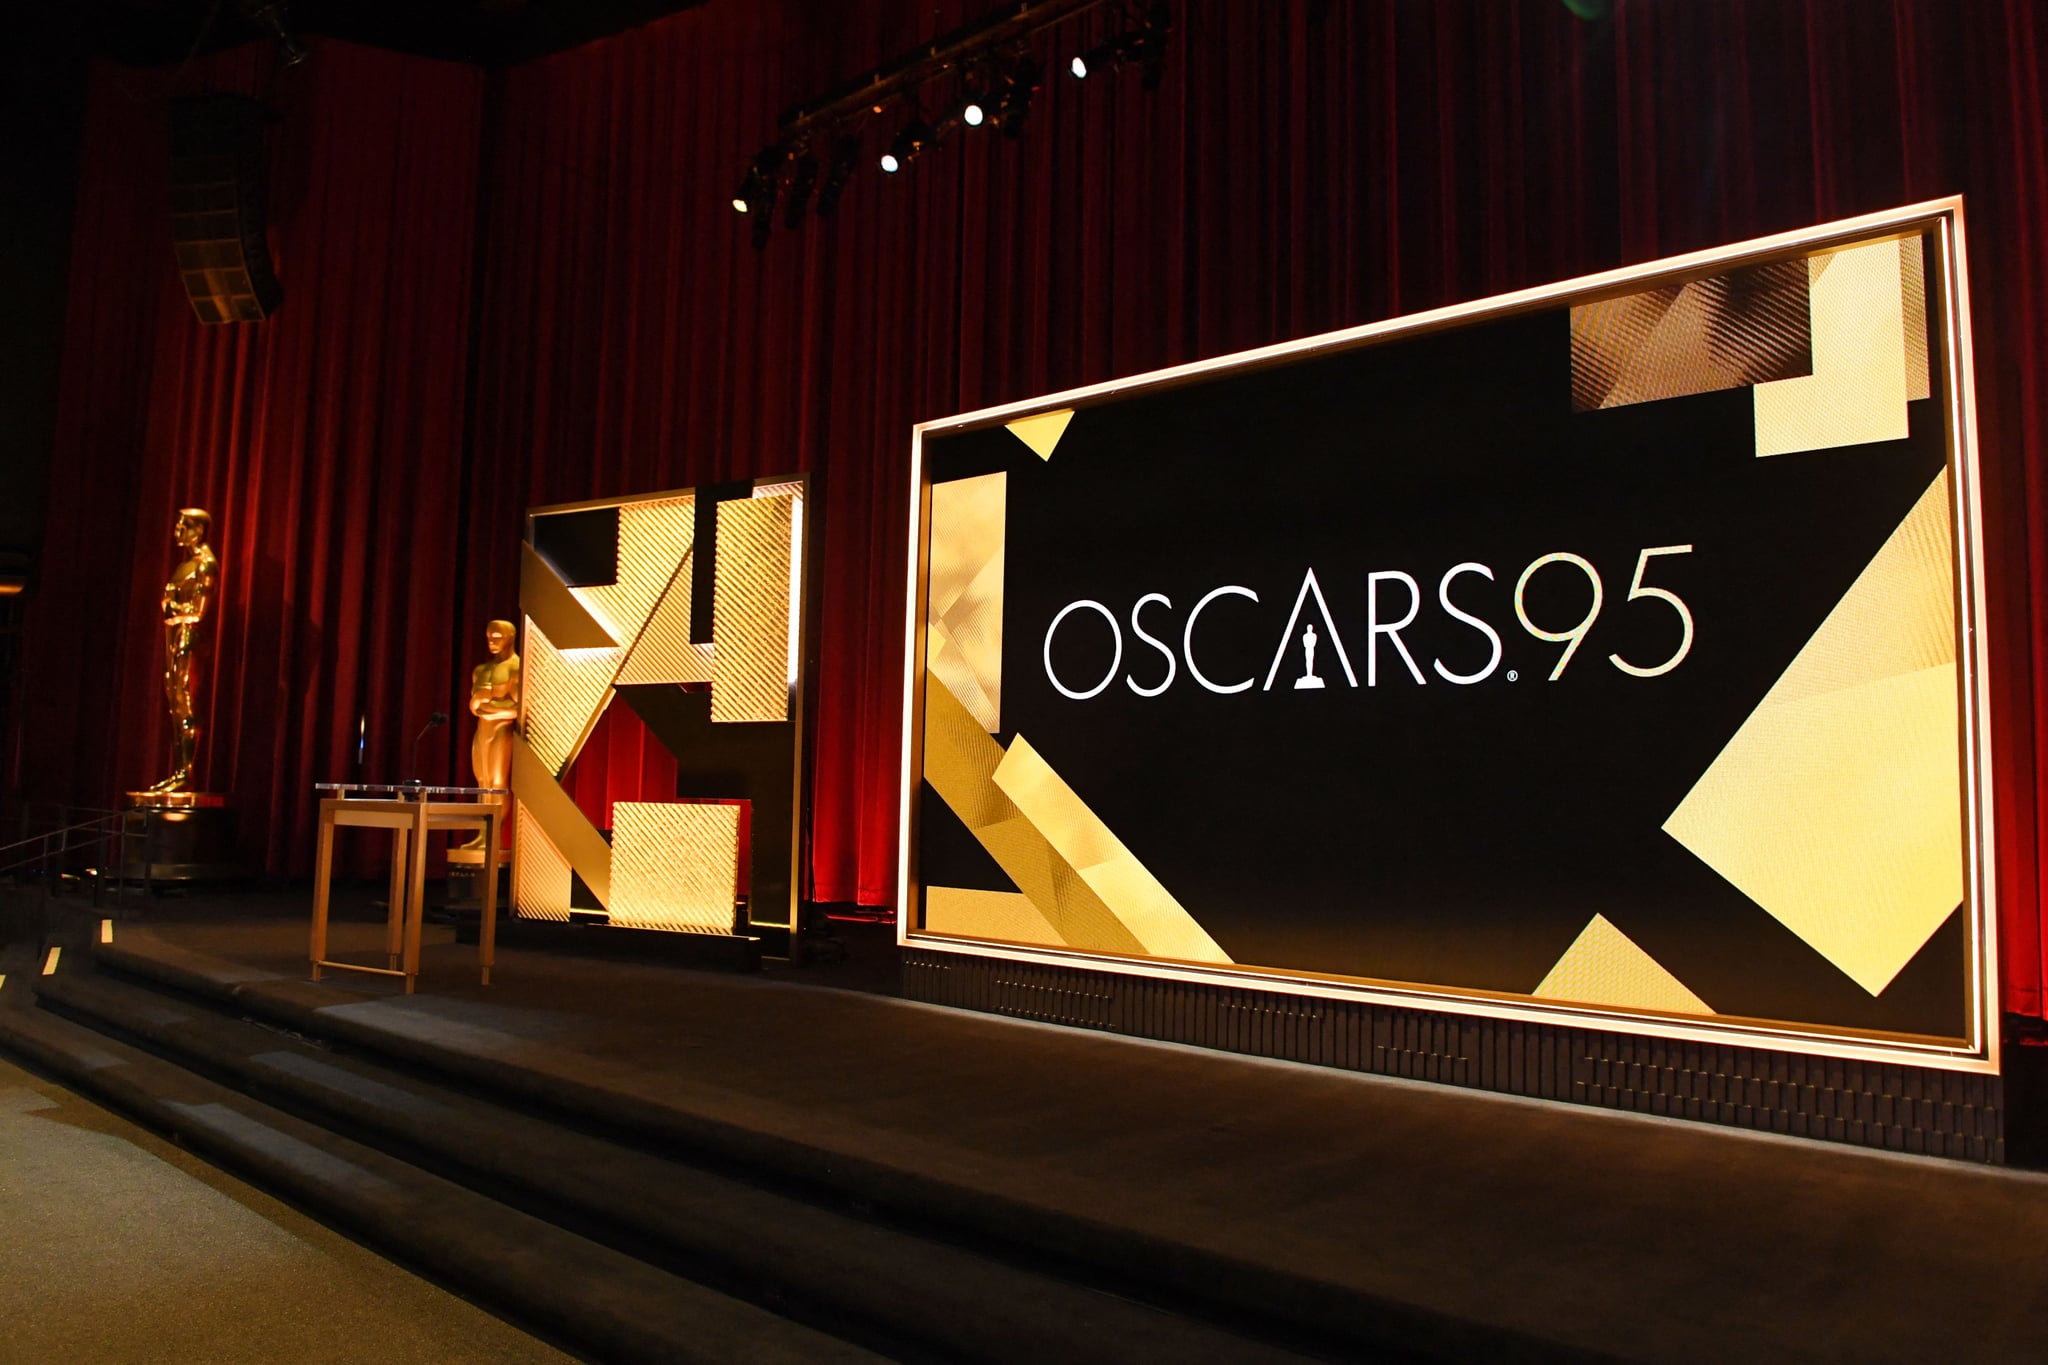 The stage is set for the 95th Academy Awards nominations announcement at the Samuel Goldwyn Theater in Beverly Hills, California, on January 24, 2023. (Photo by VALERIE MACON / AFP) (Photo by VALERIE MACON/AFP via Getty Images)